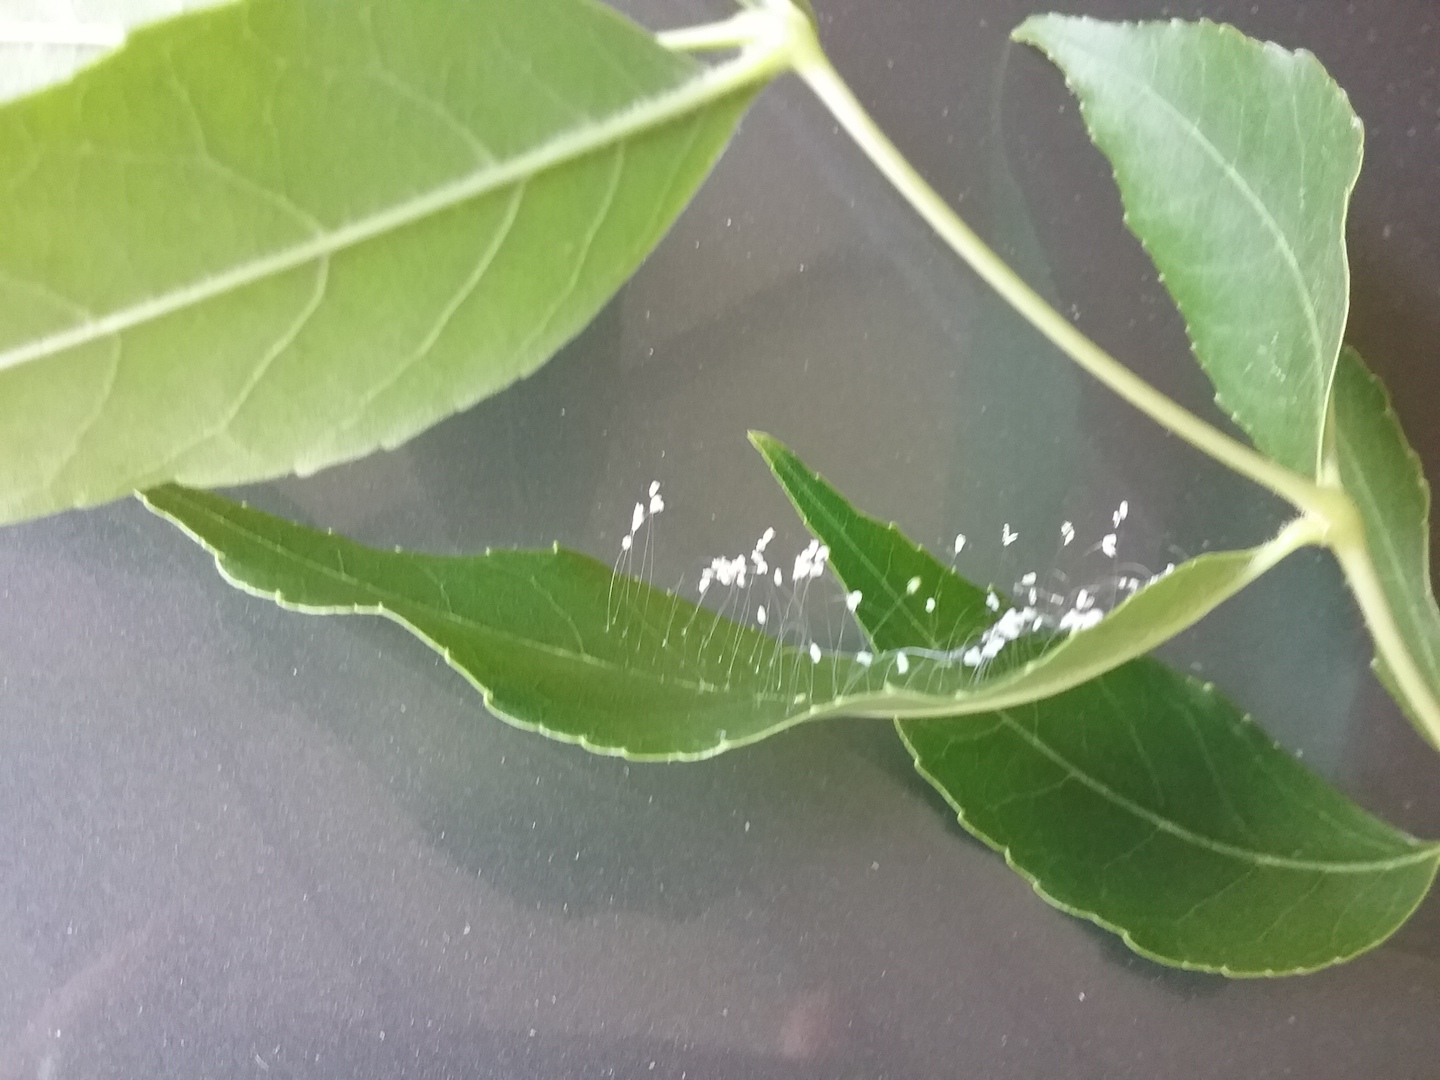 Ash tree leaf with white fuzzy critters